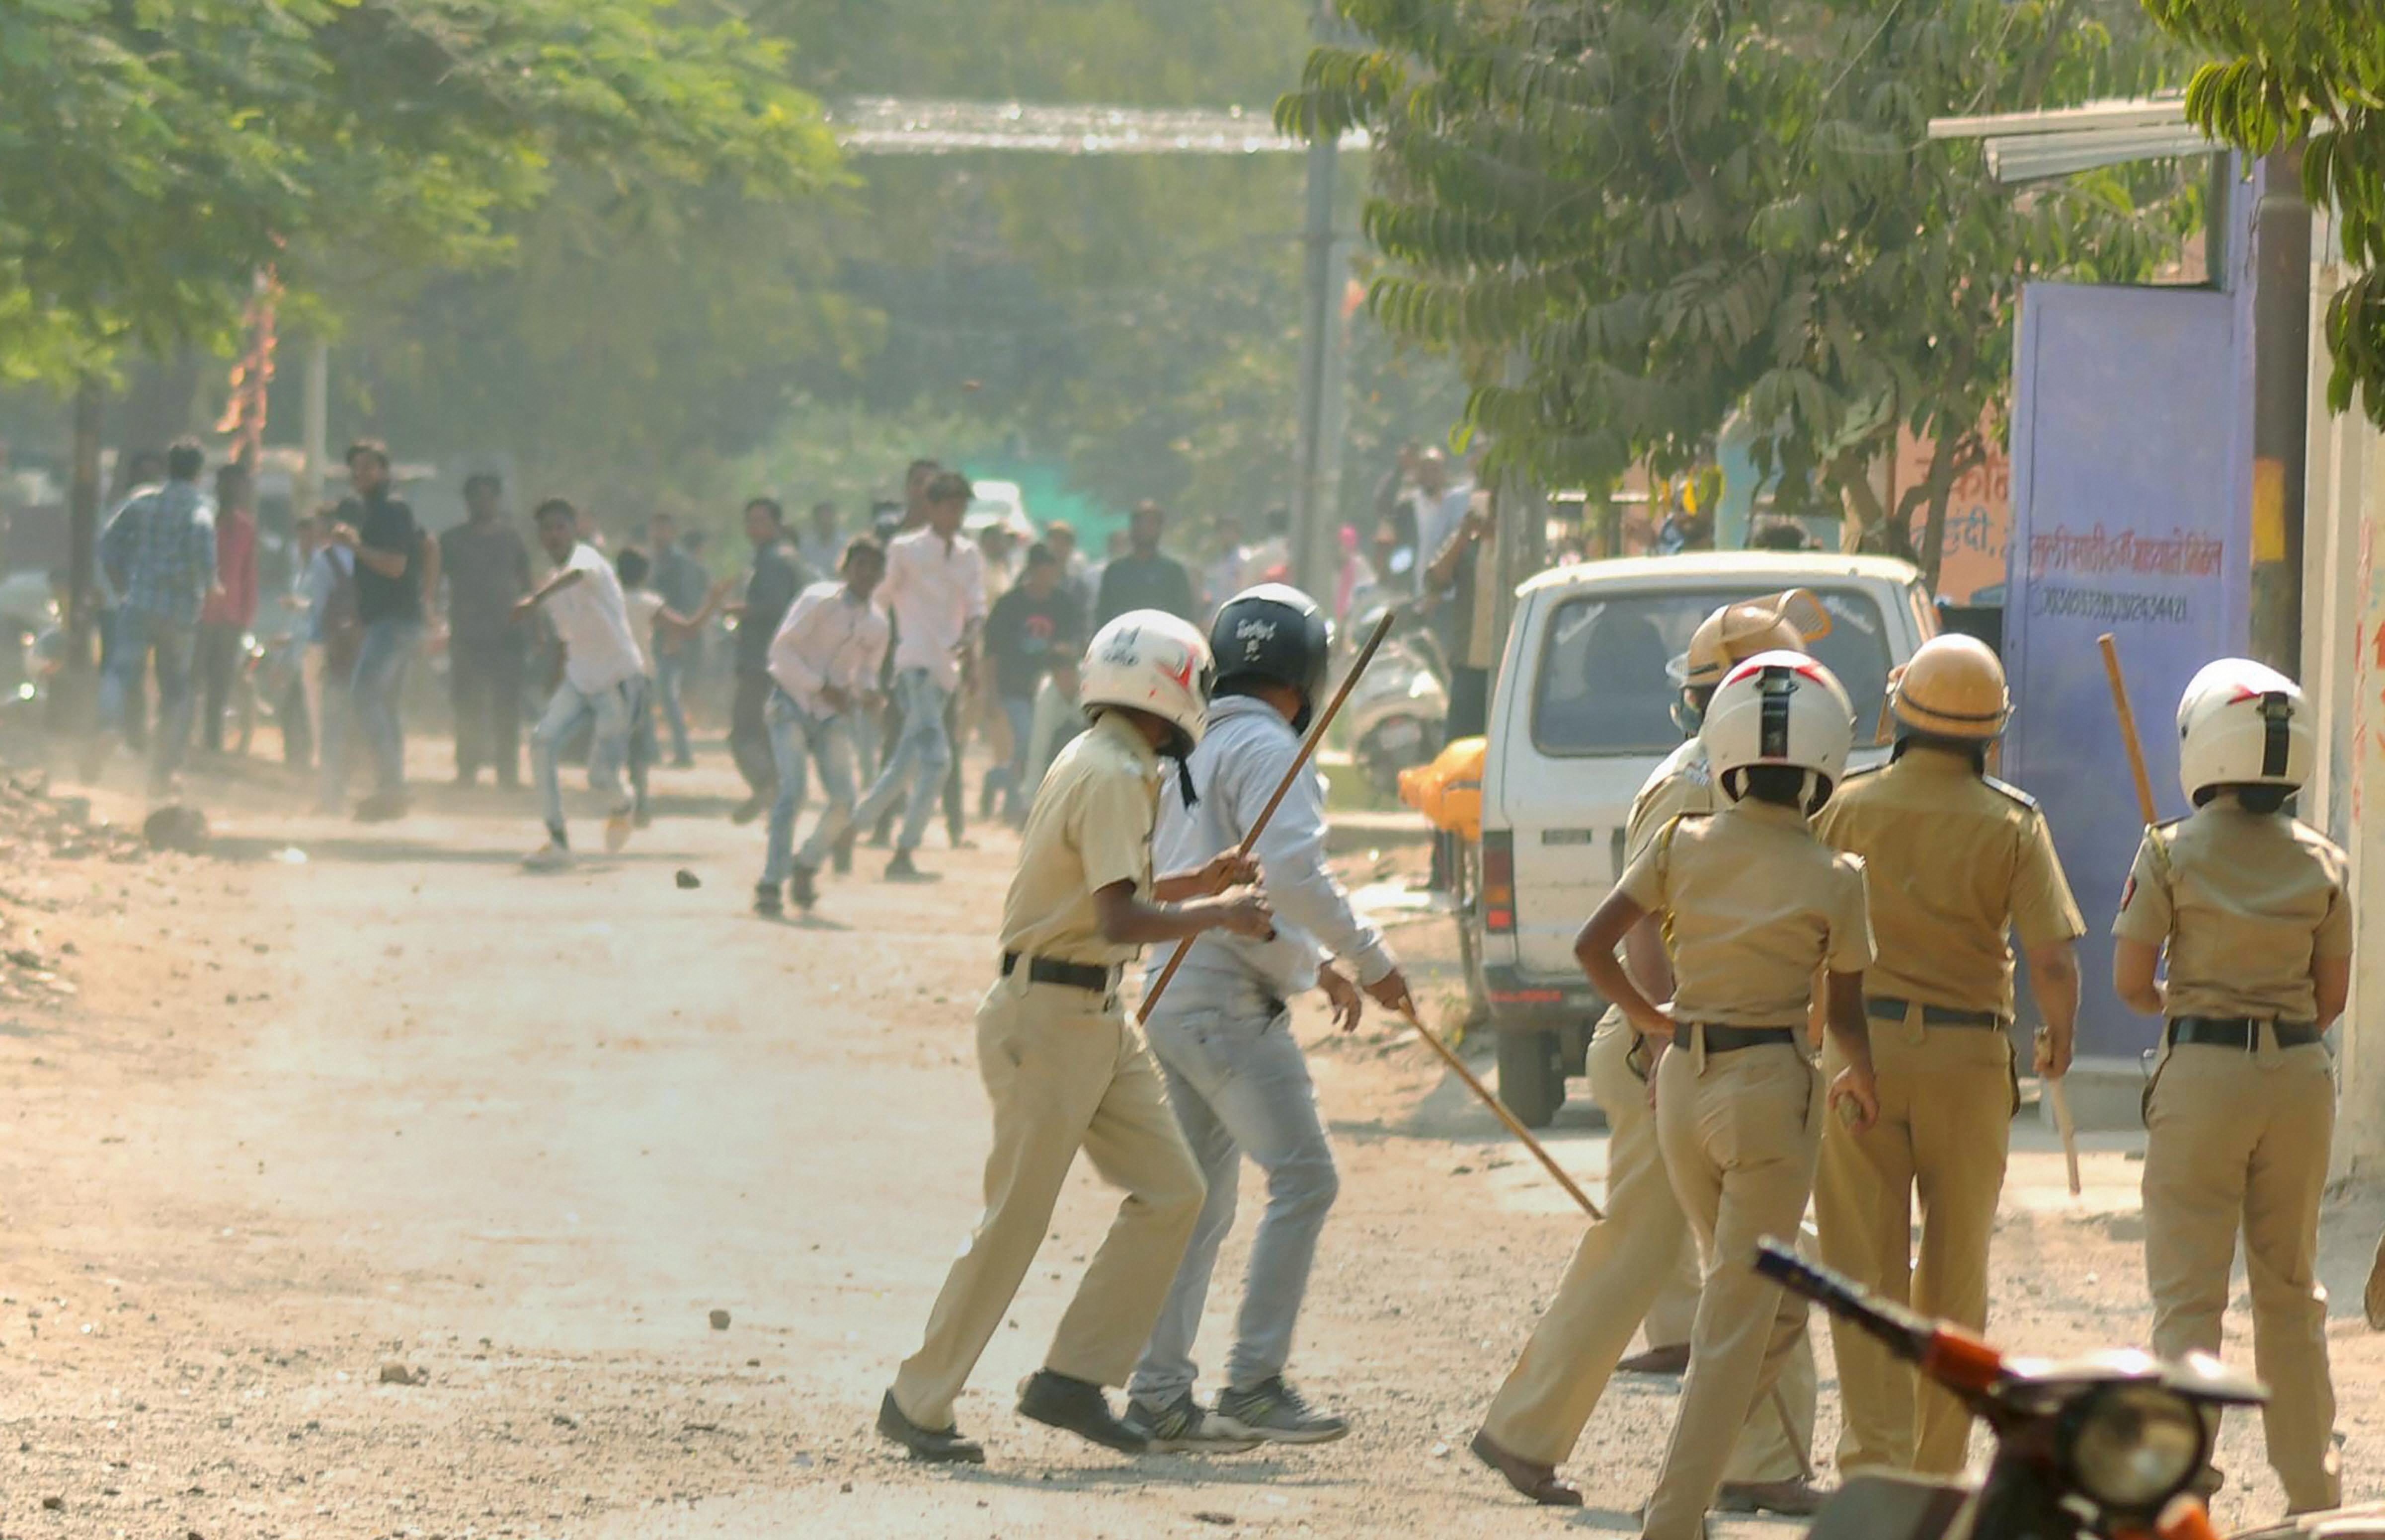 Aurangabad: RPI activists pelting stones at the police during their violent protest in Aurangabad on Tuesday, over the clashes that broke out at 200th anniversary celebrations of the Battle of Bhima in Koregaon, near Pune. PTI Photo (PTI1_2_2018_000115B)